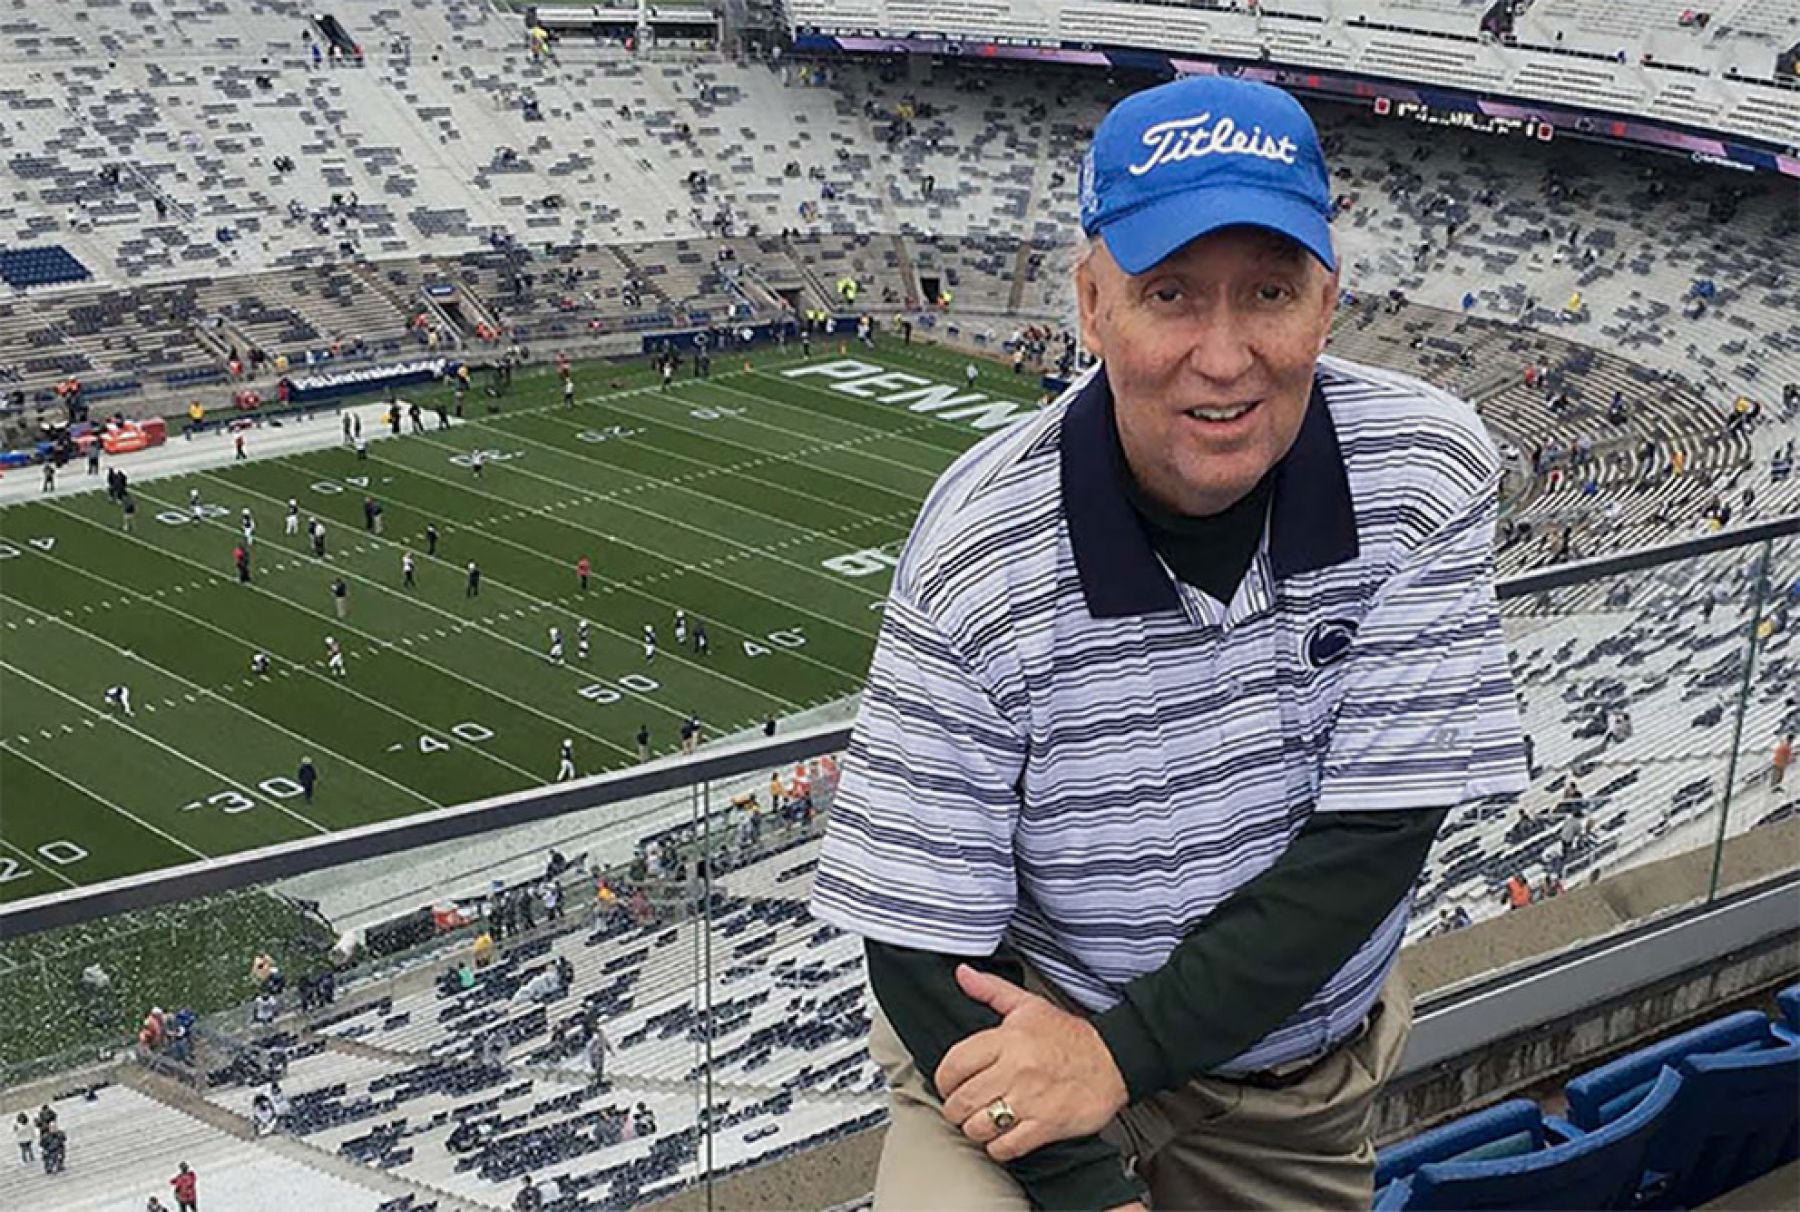 The late Rick Starr stands along in the bleachers at Beaver Stadium